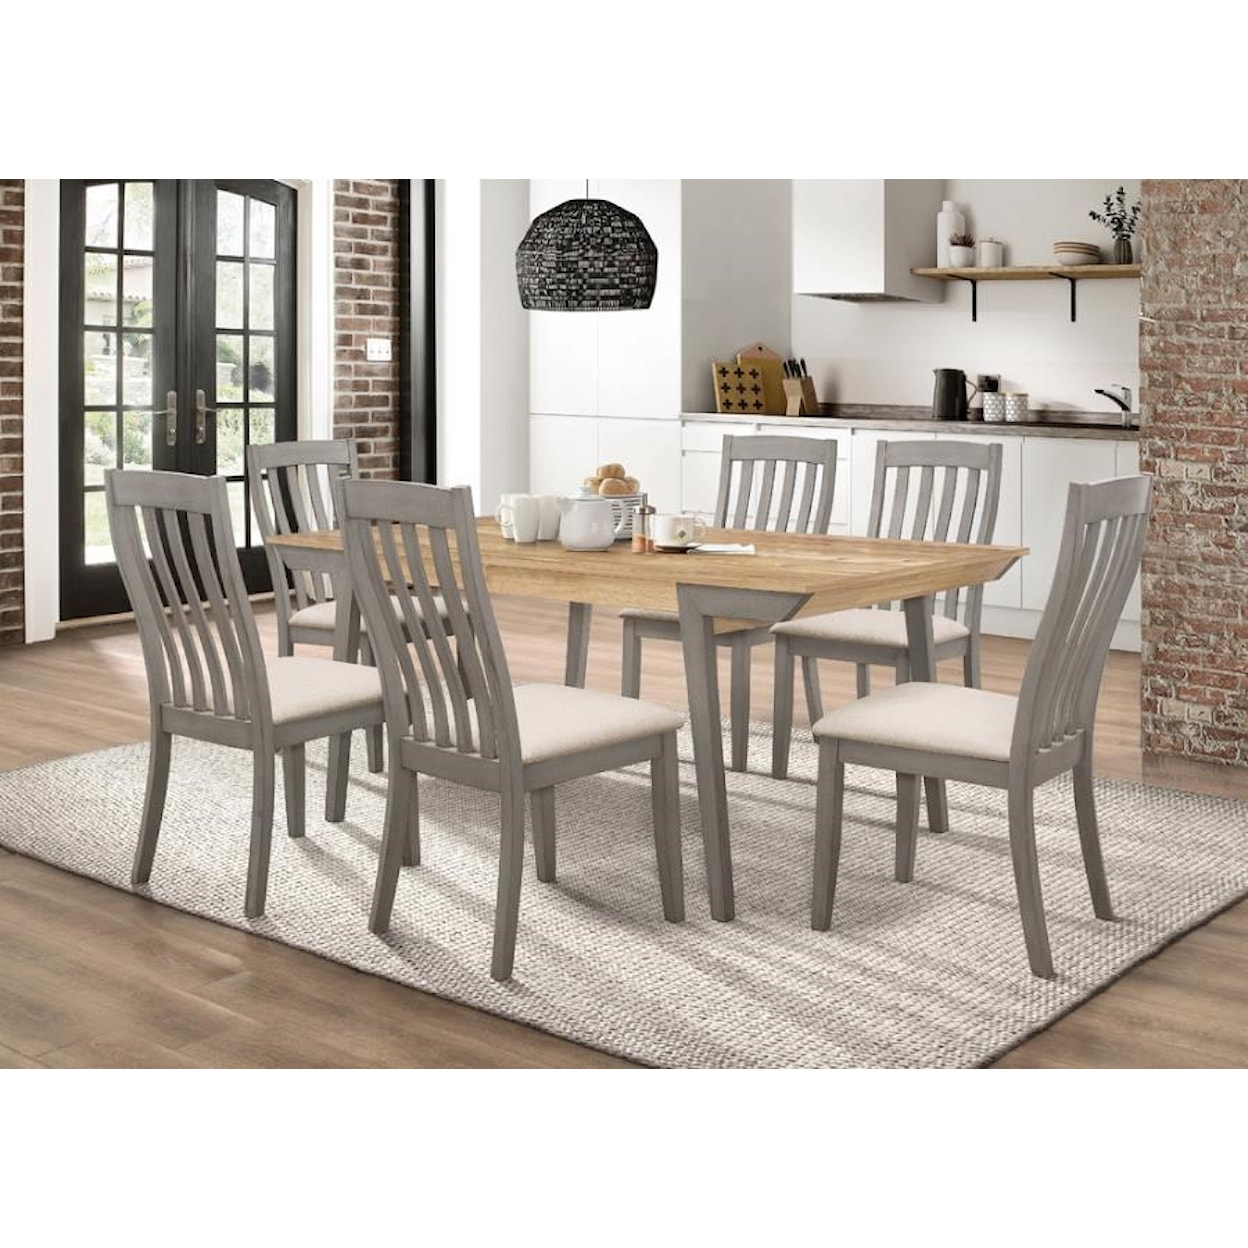 Coaster Nogales 7pc Dining Room Group